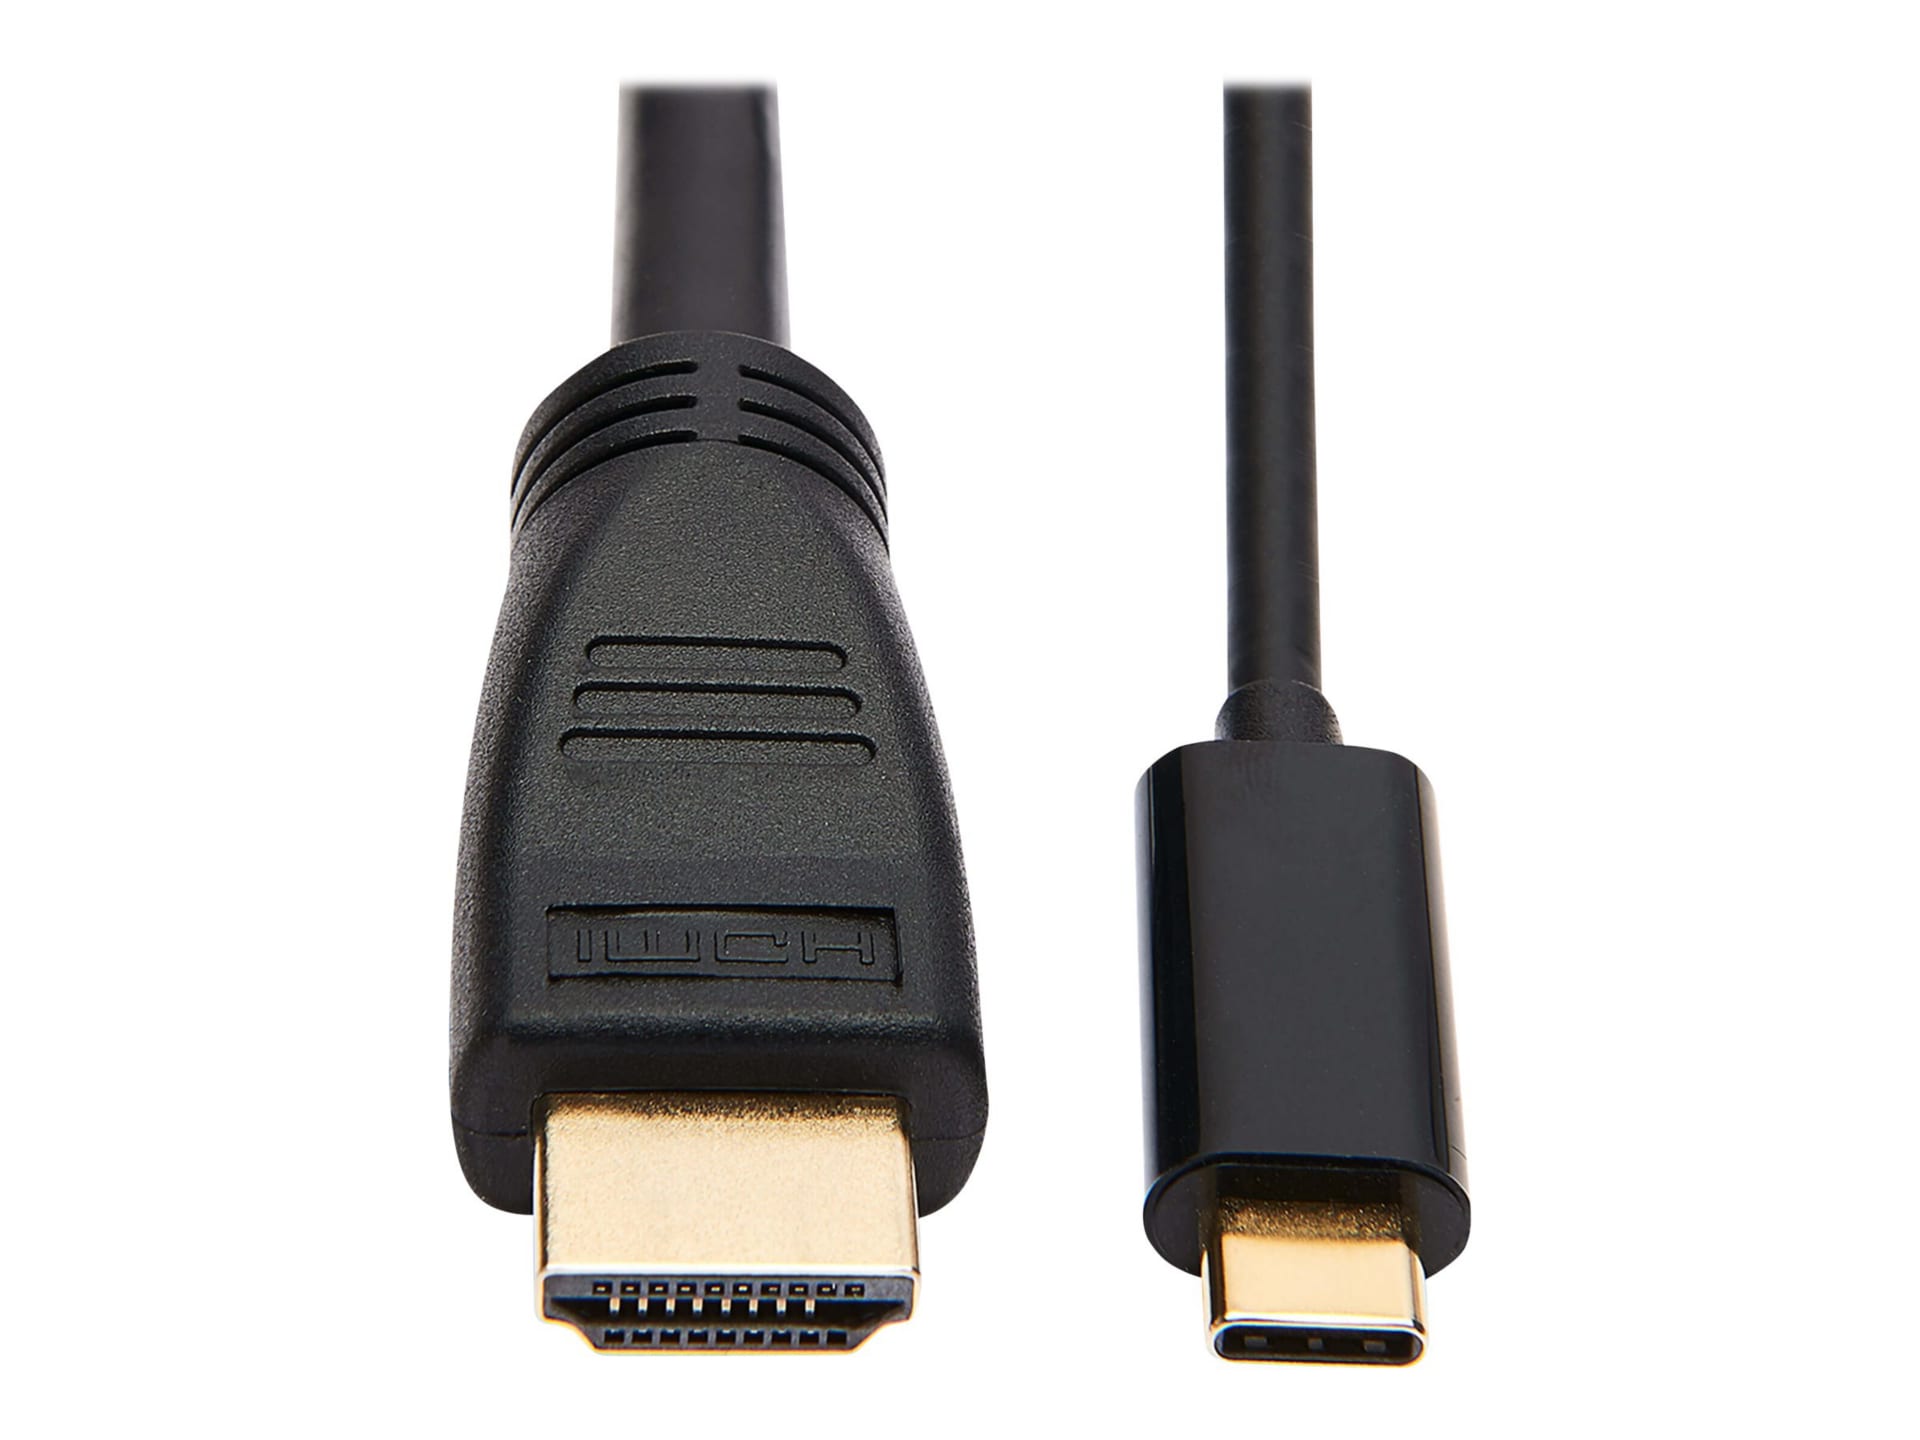 Tripp Lite USB C to HDMI Adapter Cable USB 3.1 Gen 1 4K M/M USB-C Black 6ft - video cable - HDMI / USB - 6 ft